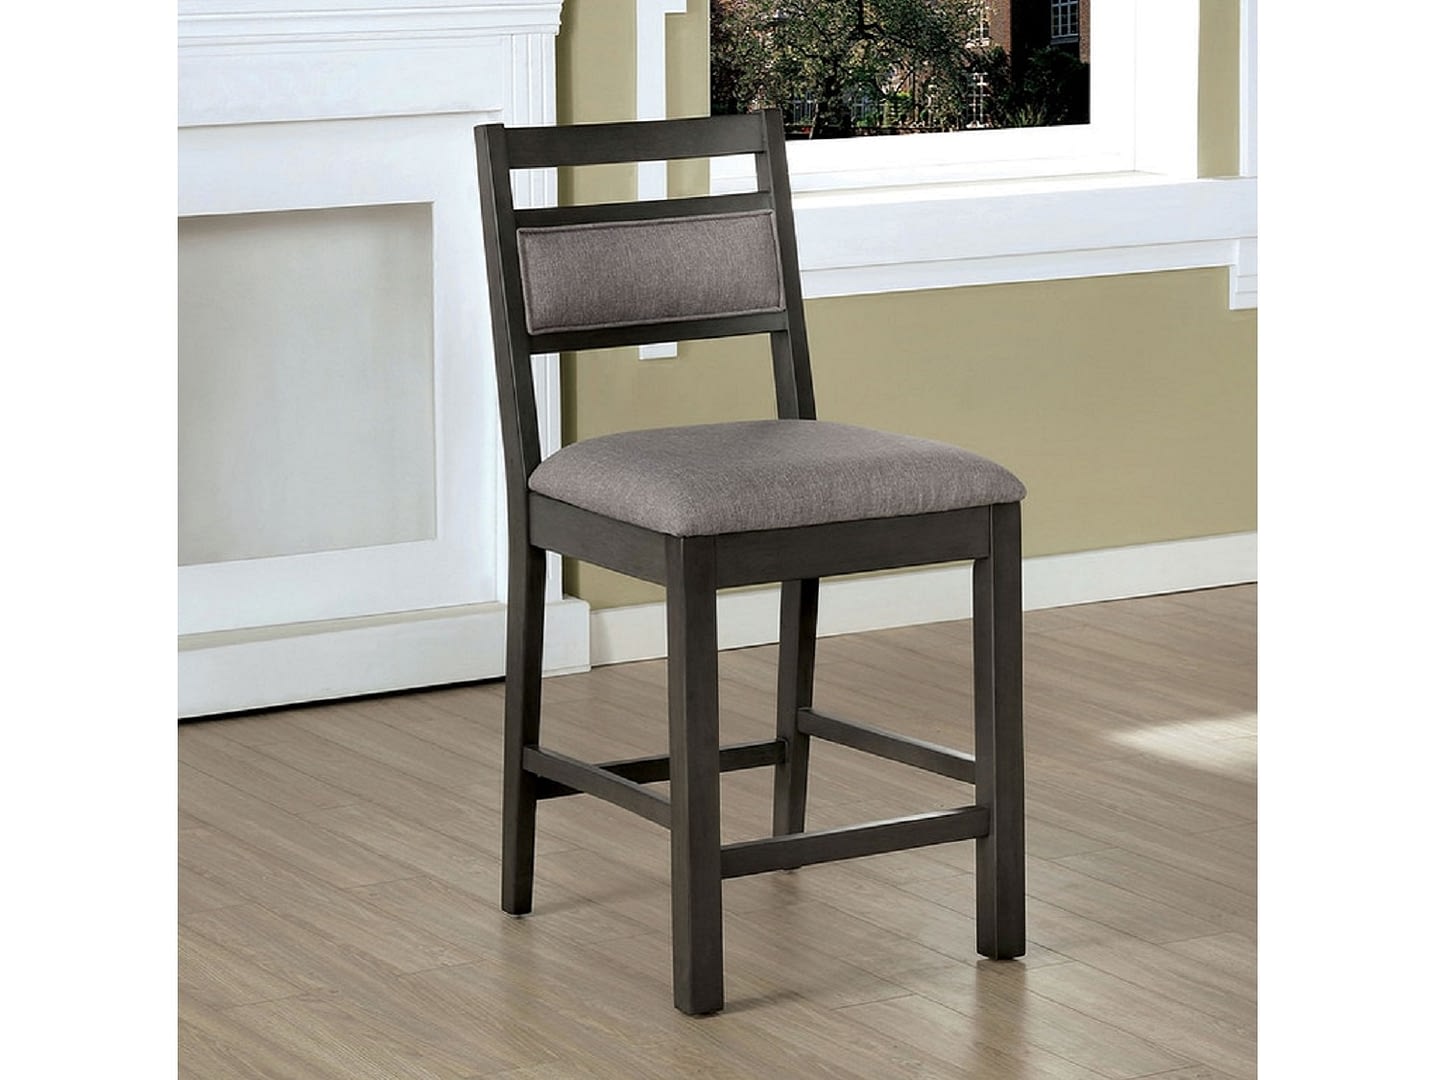 LANDAFF Counter Height Dining Chair